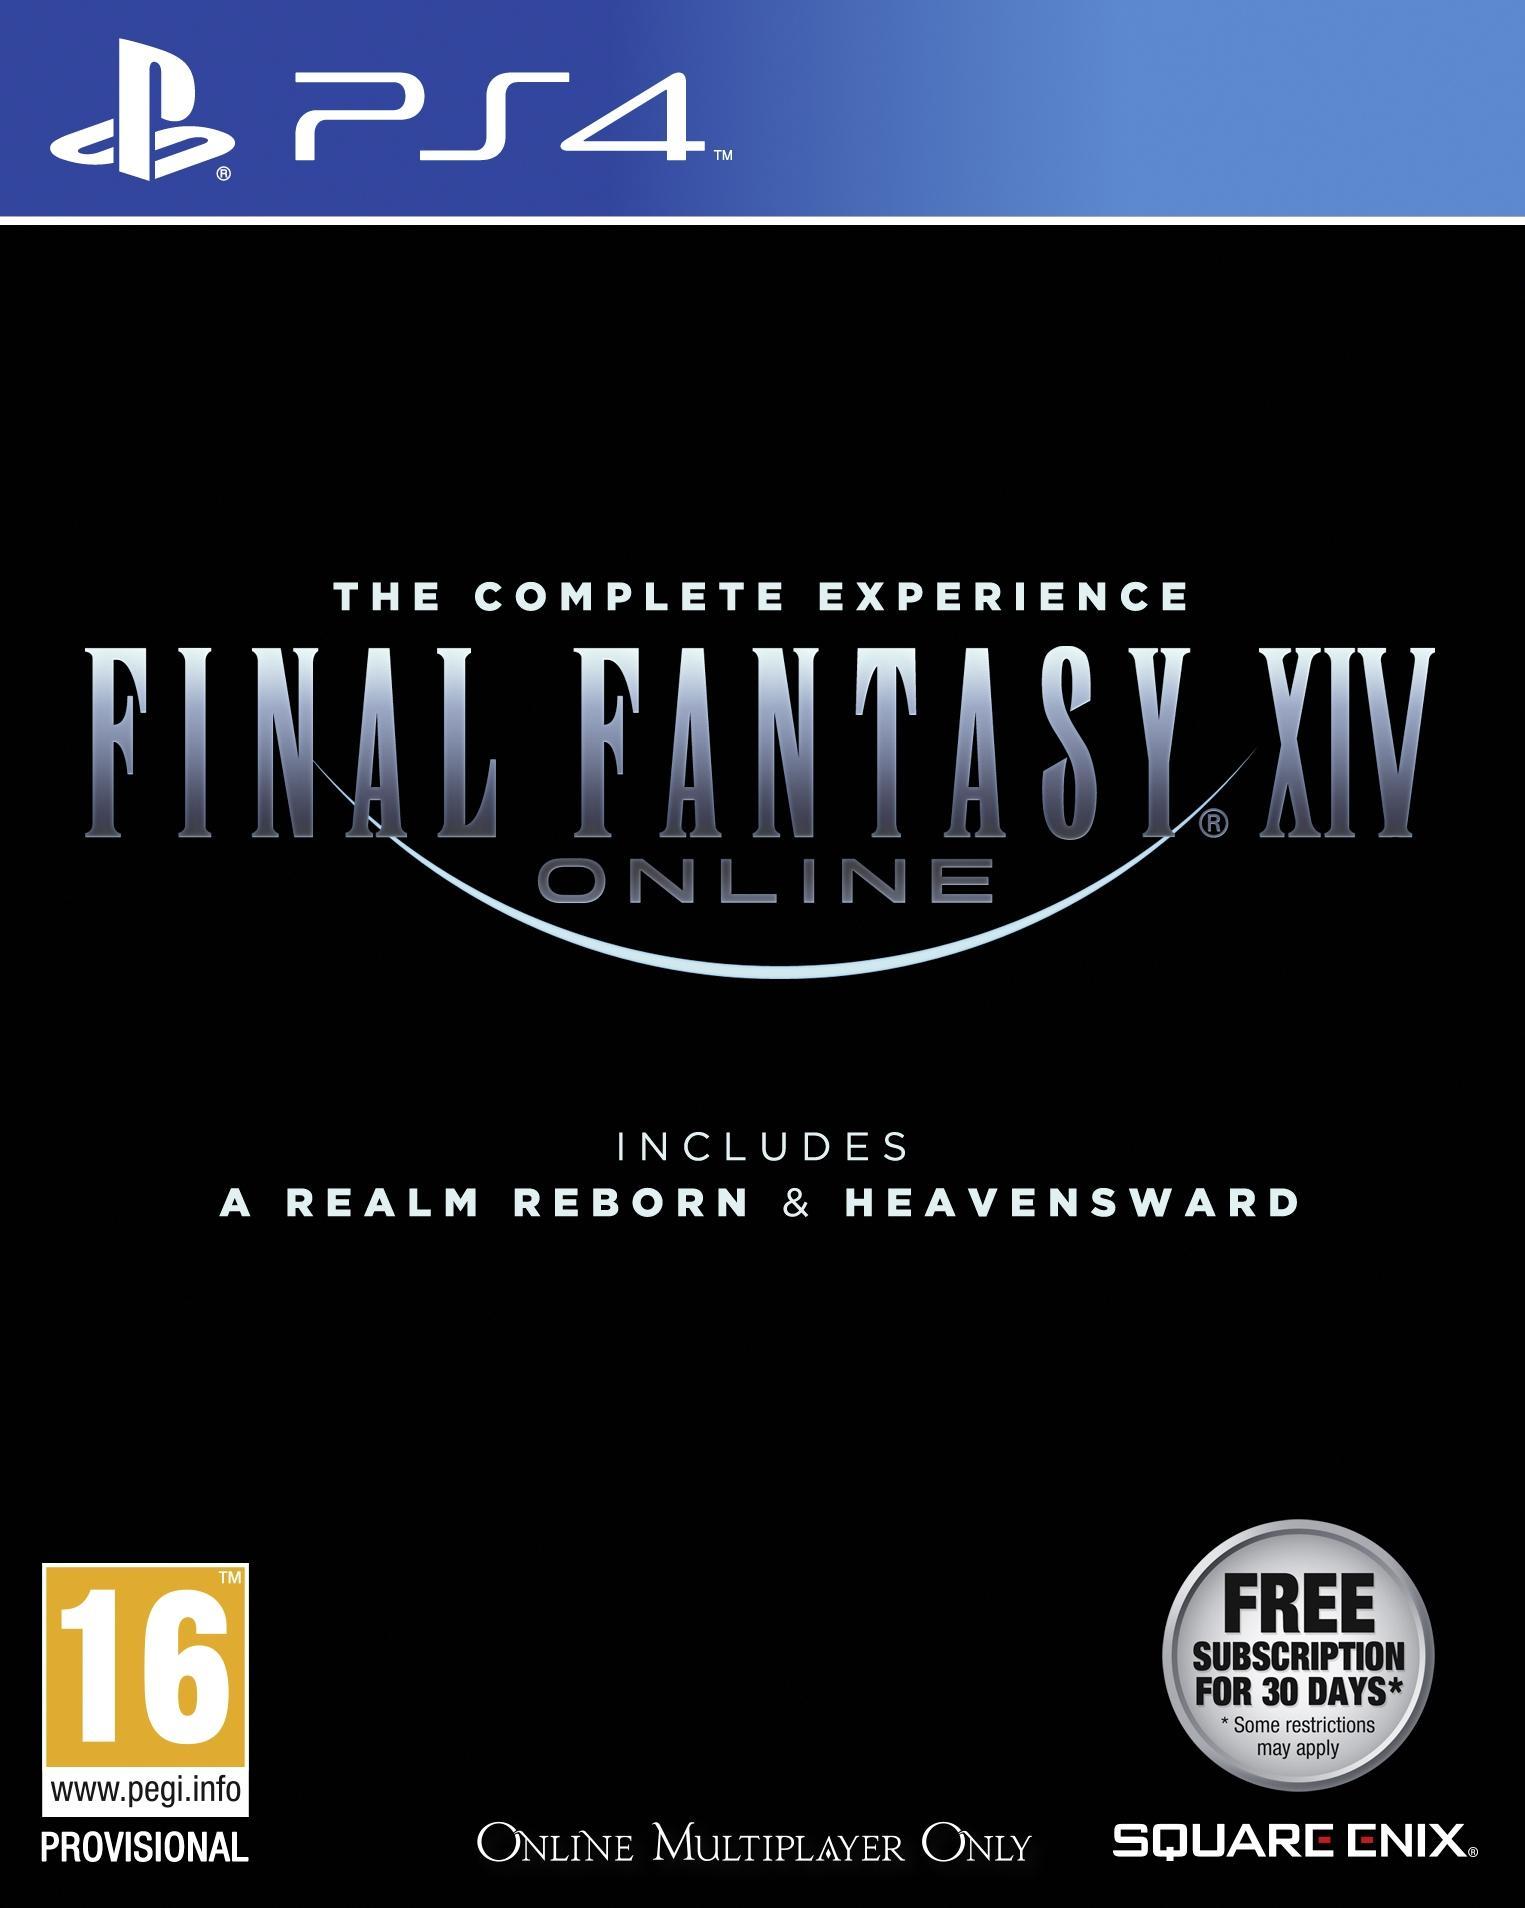 Final Fantasy XIV Online: Heavensward - The Complete Experience (PS4), Square Enix